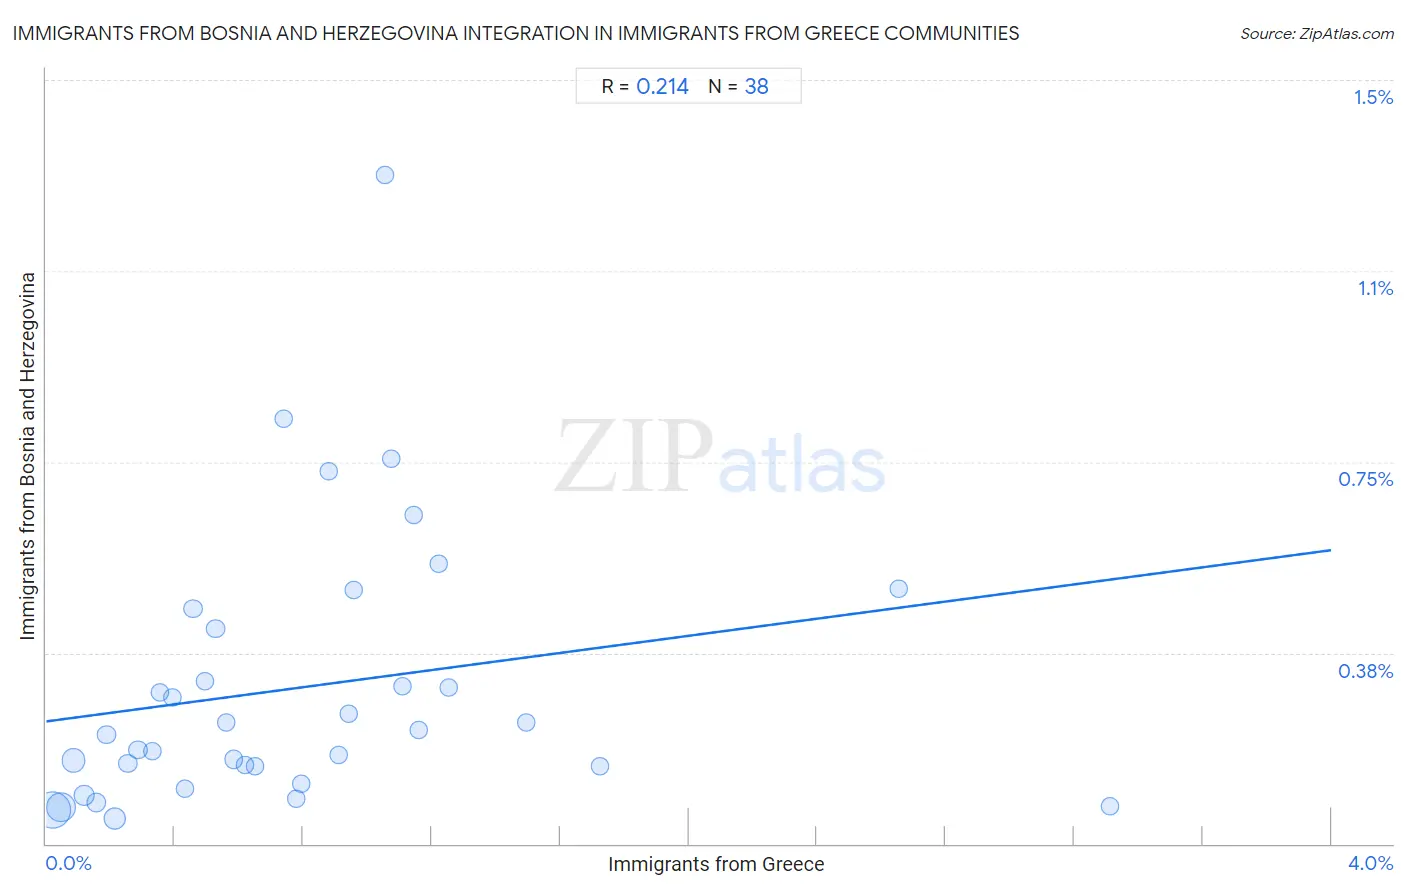 Immigrants from Greece Integration in Immigrants from Bosnia and Herzegovina Communities